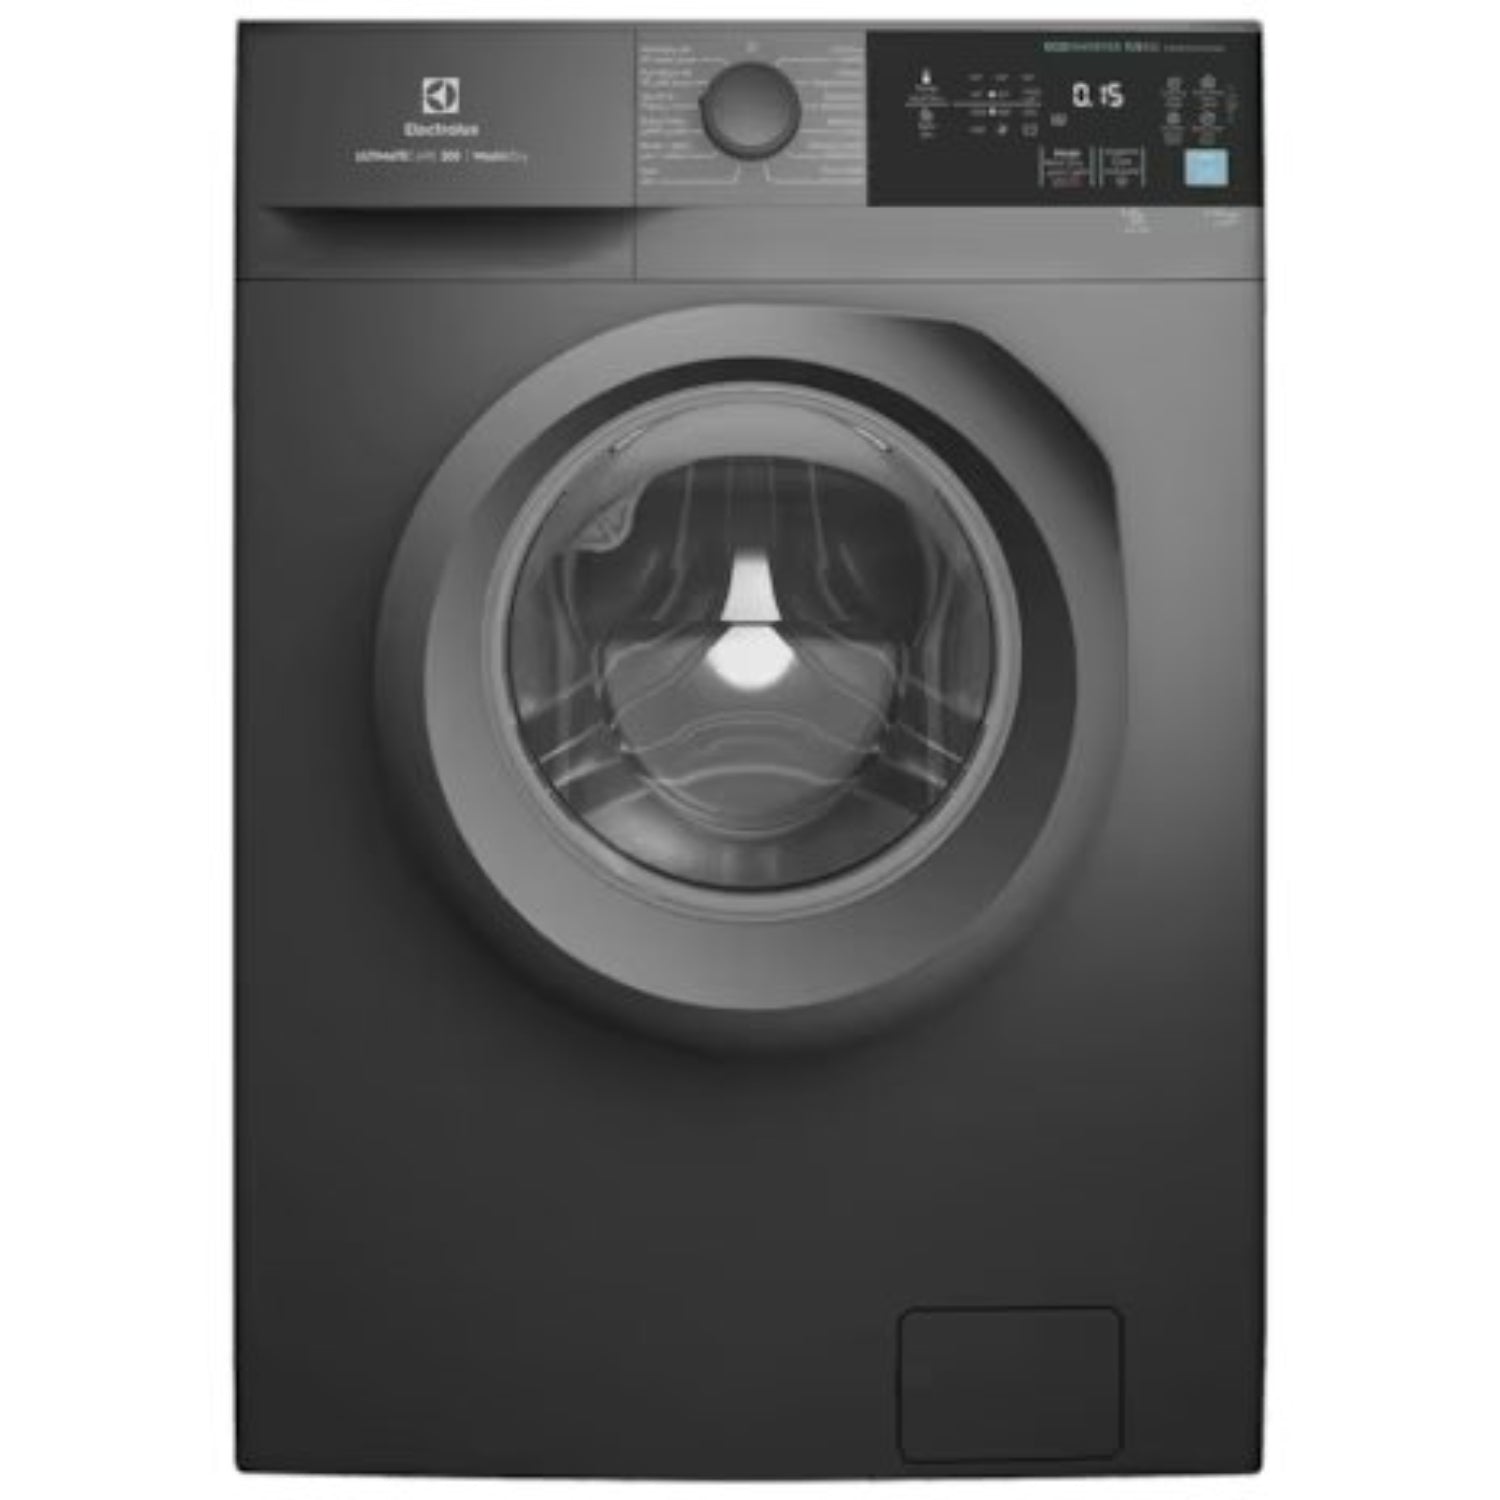 Electrolux 7kg/5kg Washer Dryer Combo with Steam Care, Onyx Dark Silver, 10-year Warranty on EcoInverter Motor